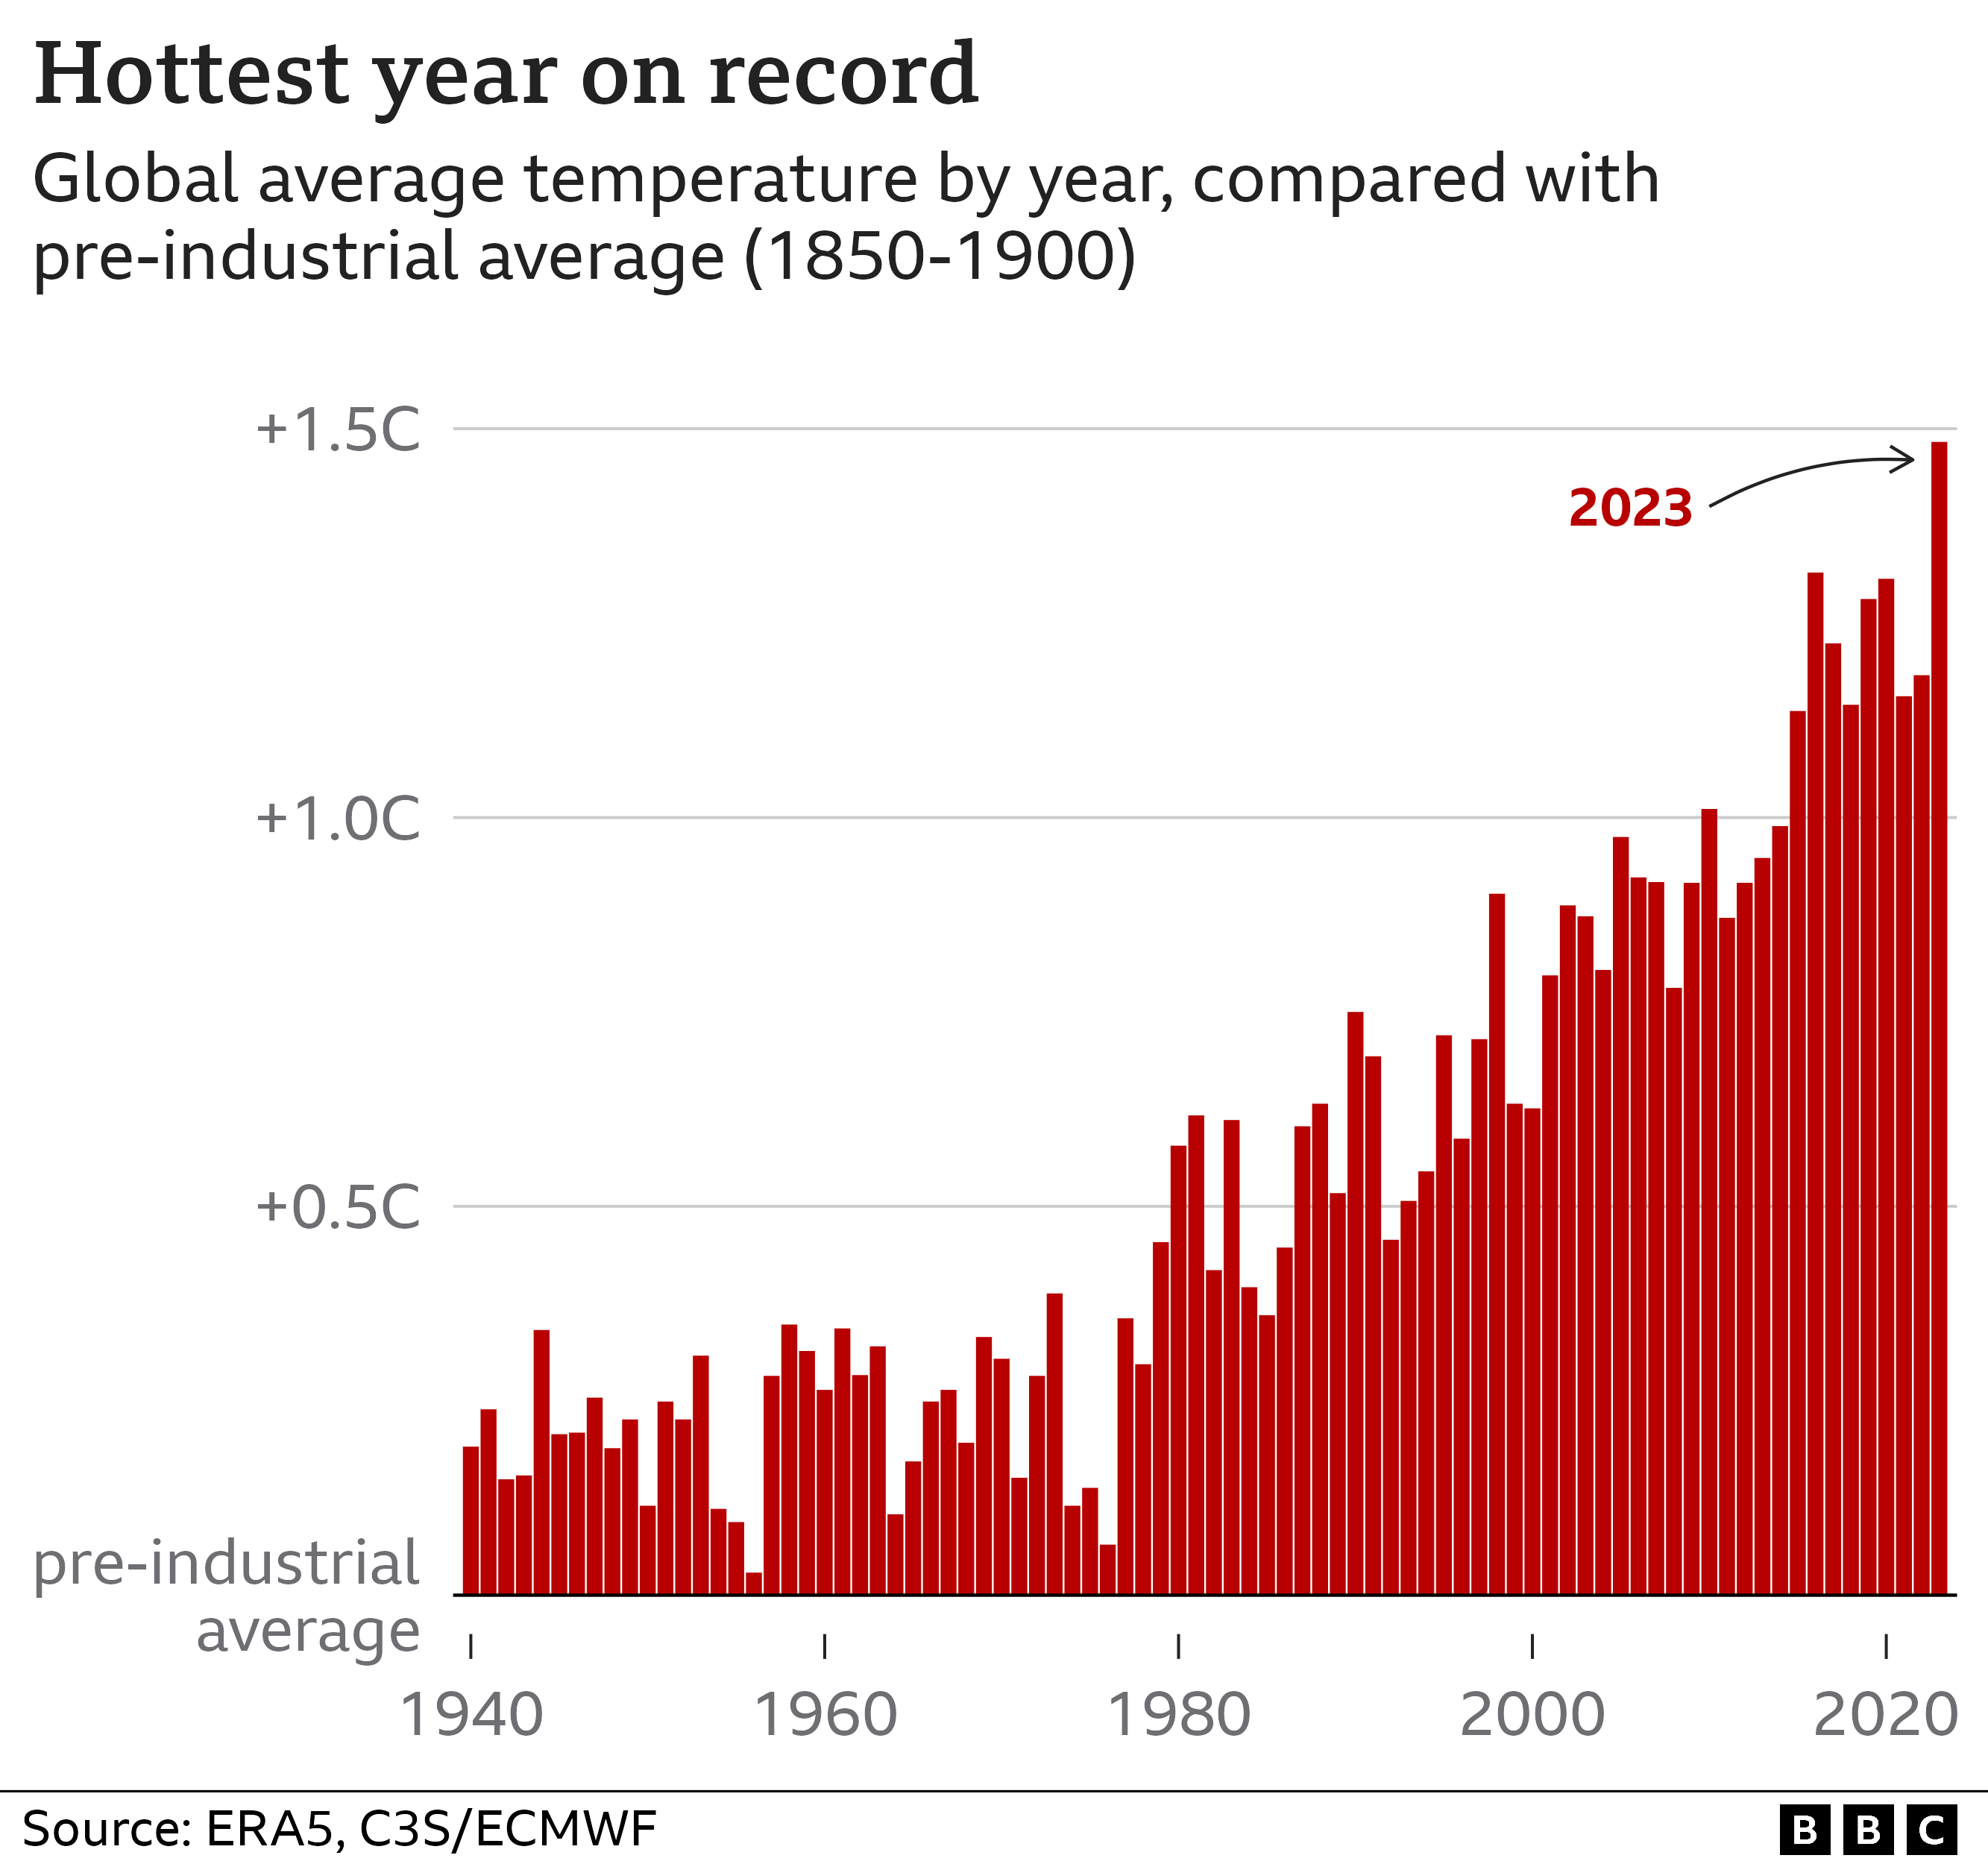 CO2 emissions are set to exceed 1.5 degrees of global warming